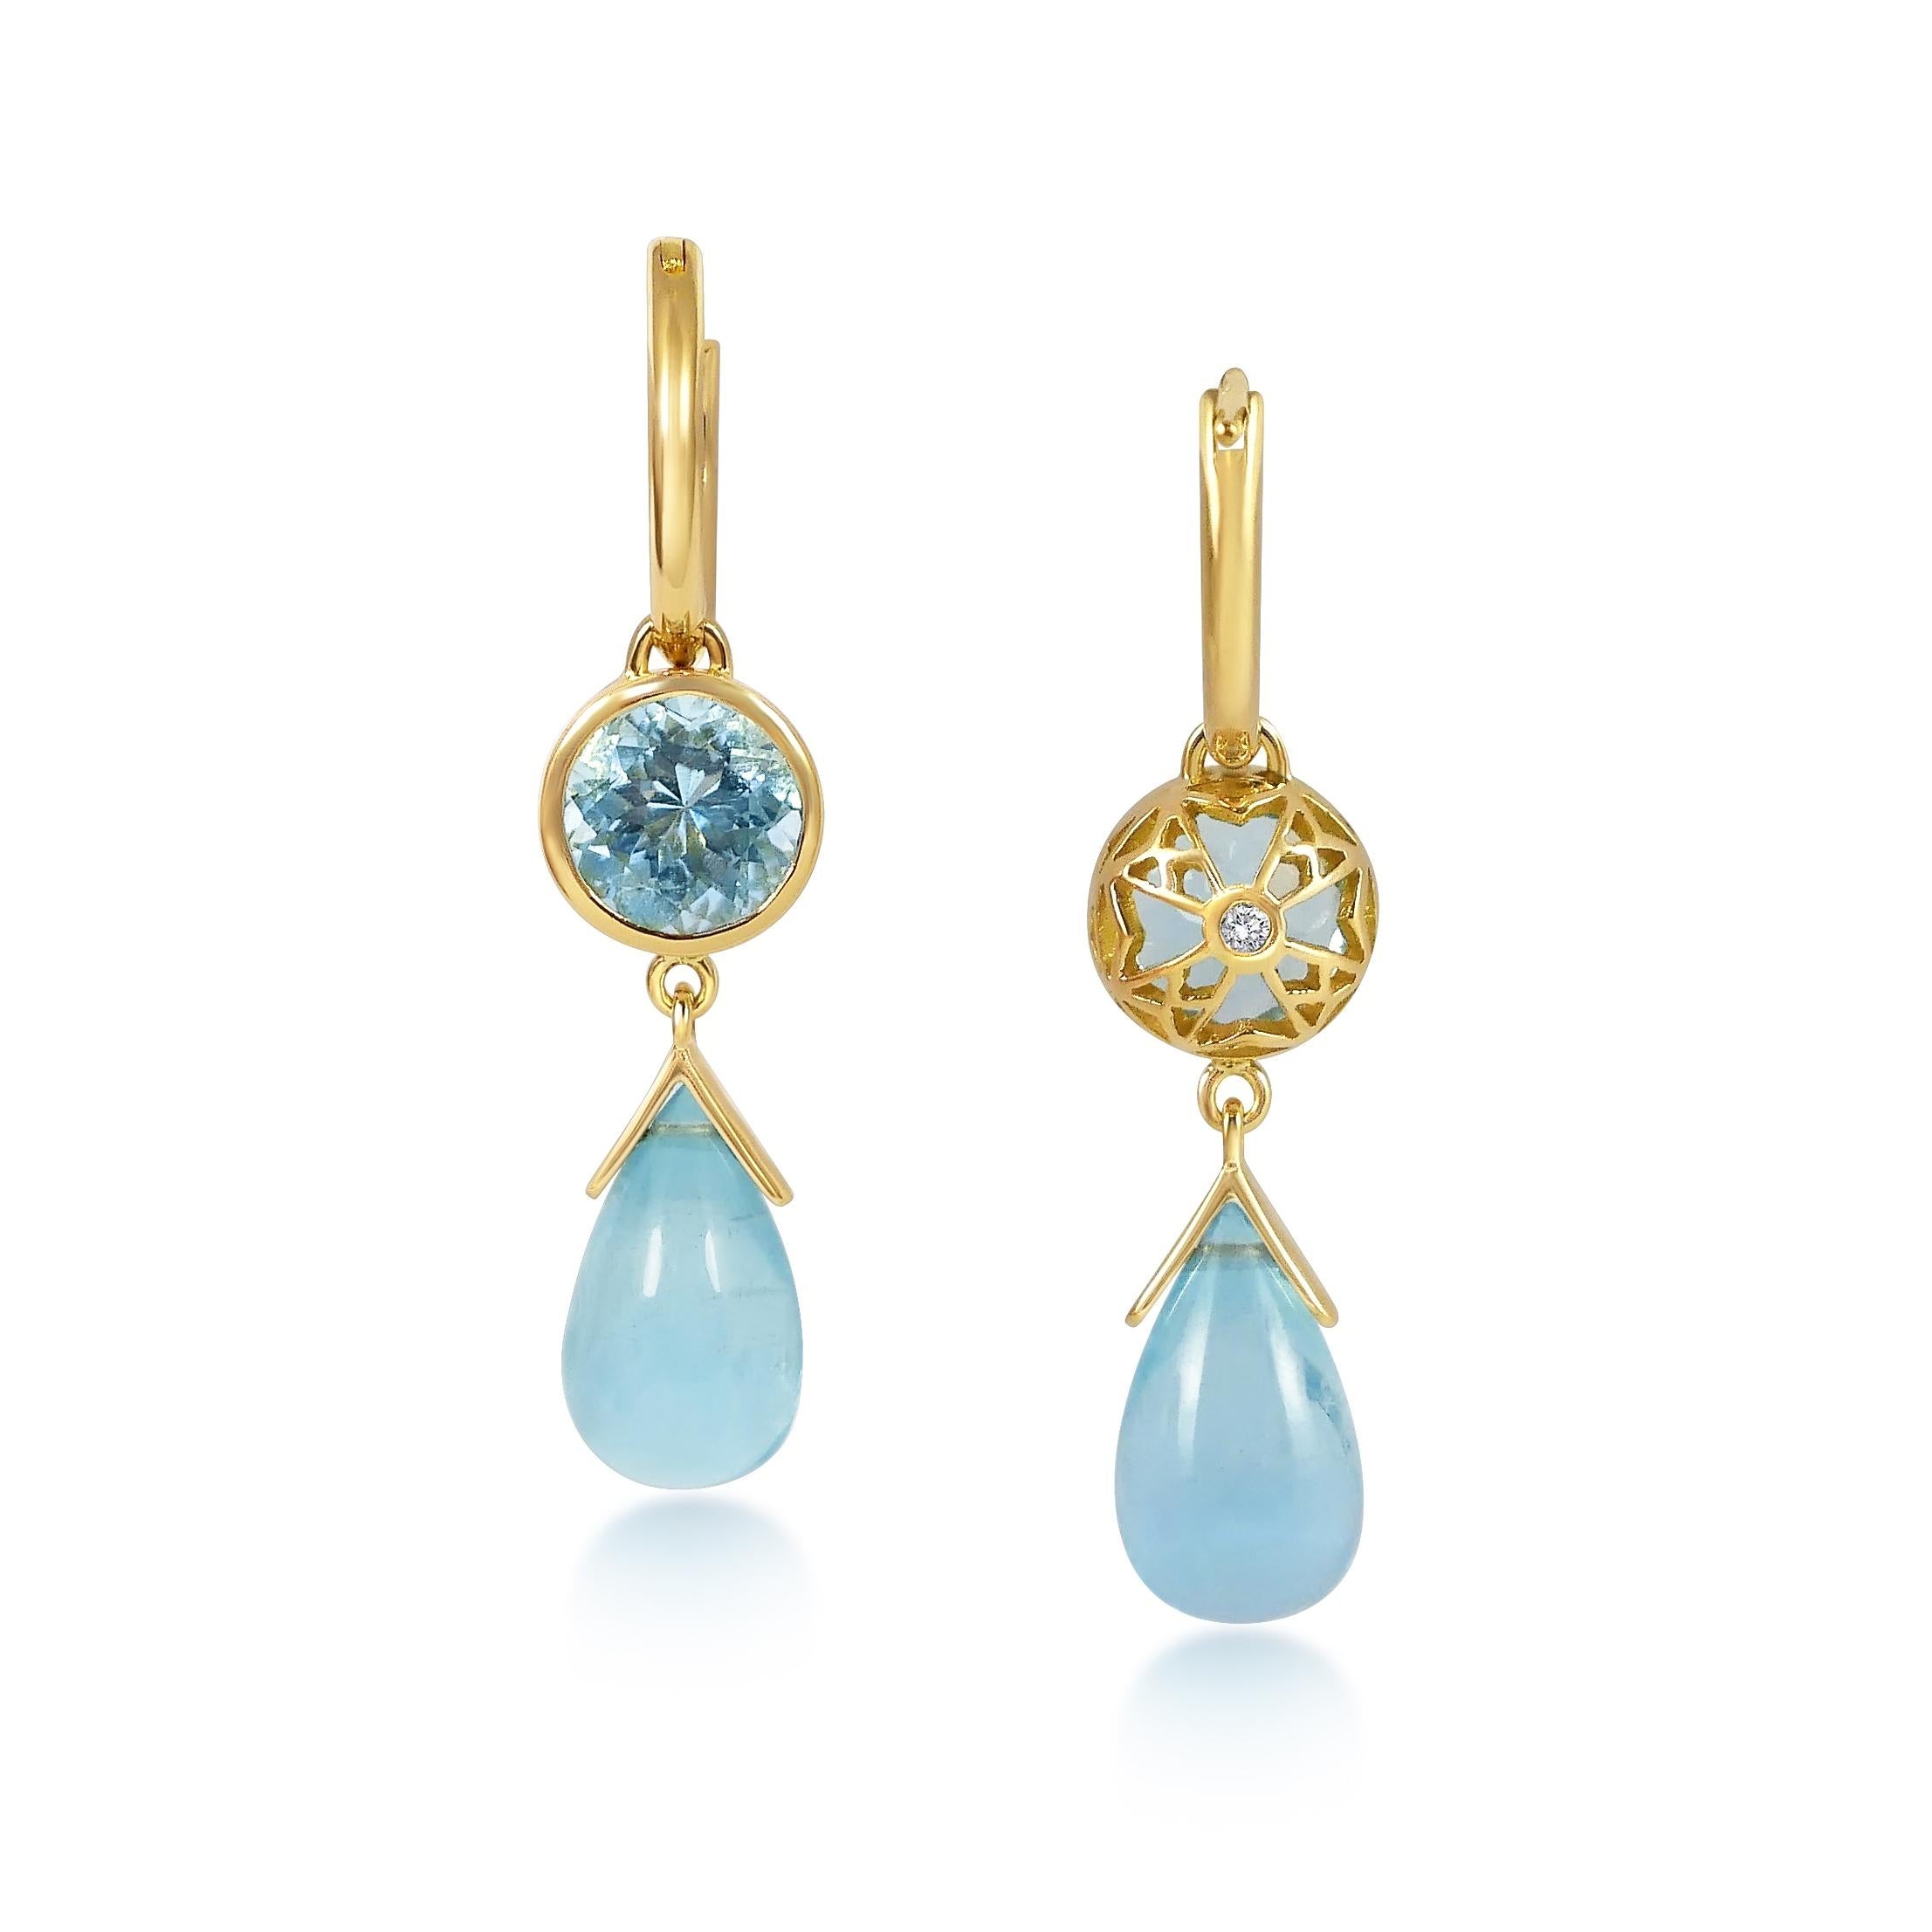 Handcrafted 2.70 & 4.40 Carats Aquamarines 3,55 Grams 18 Karat Yellow Gold Drop Earrings. Dancing drops carved in Aquamarine under a set of 8mm round cut Aquamarine stones encased in our iconic hand pierced gold lace to let the light through. A